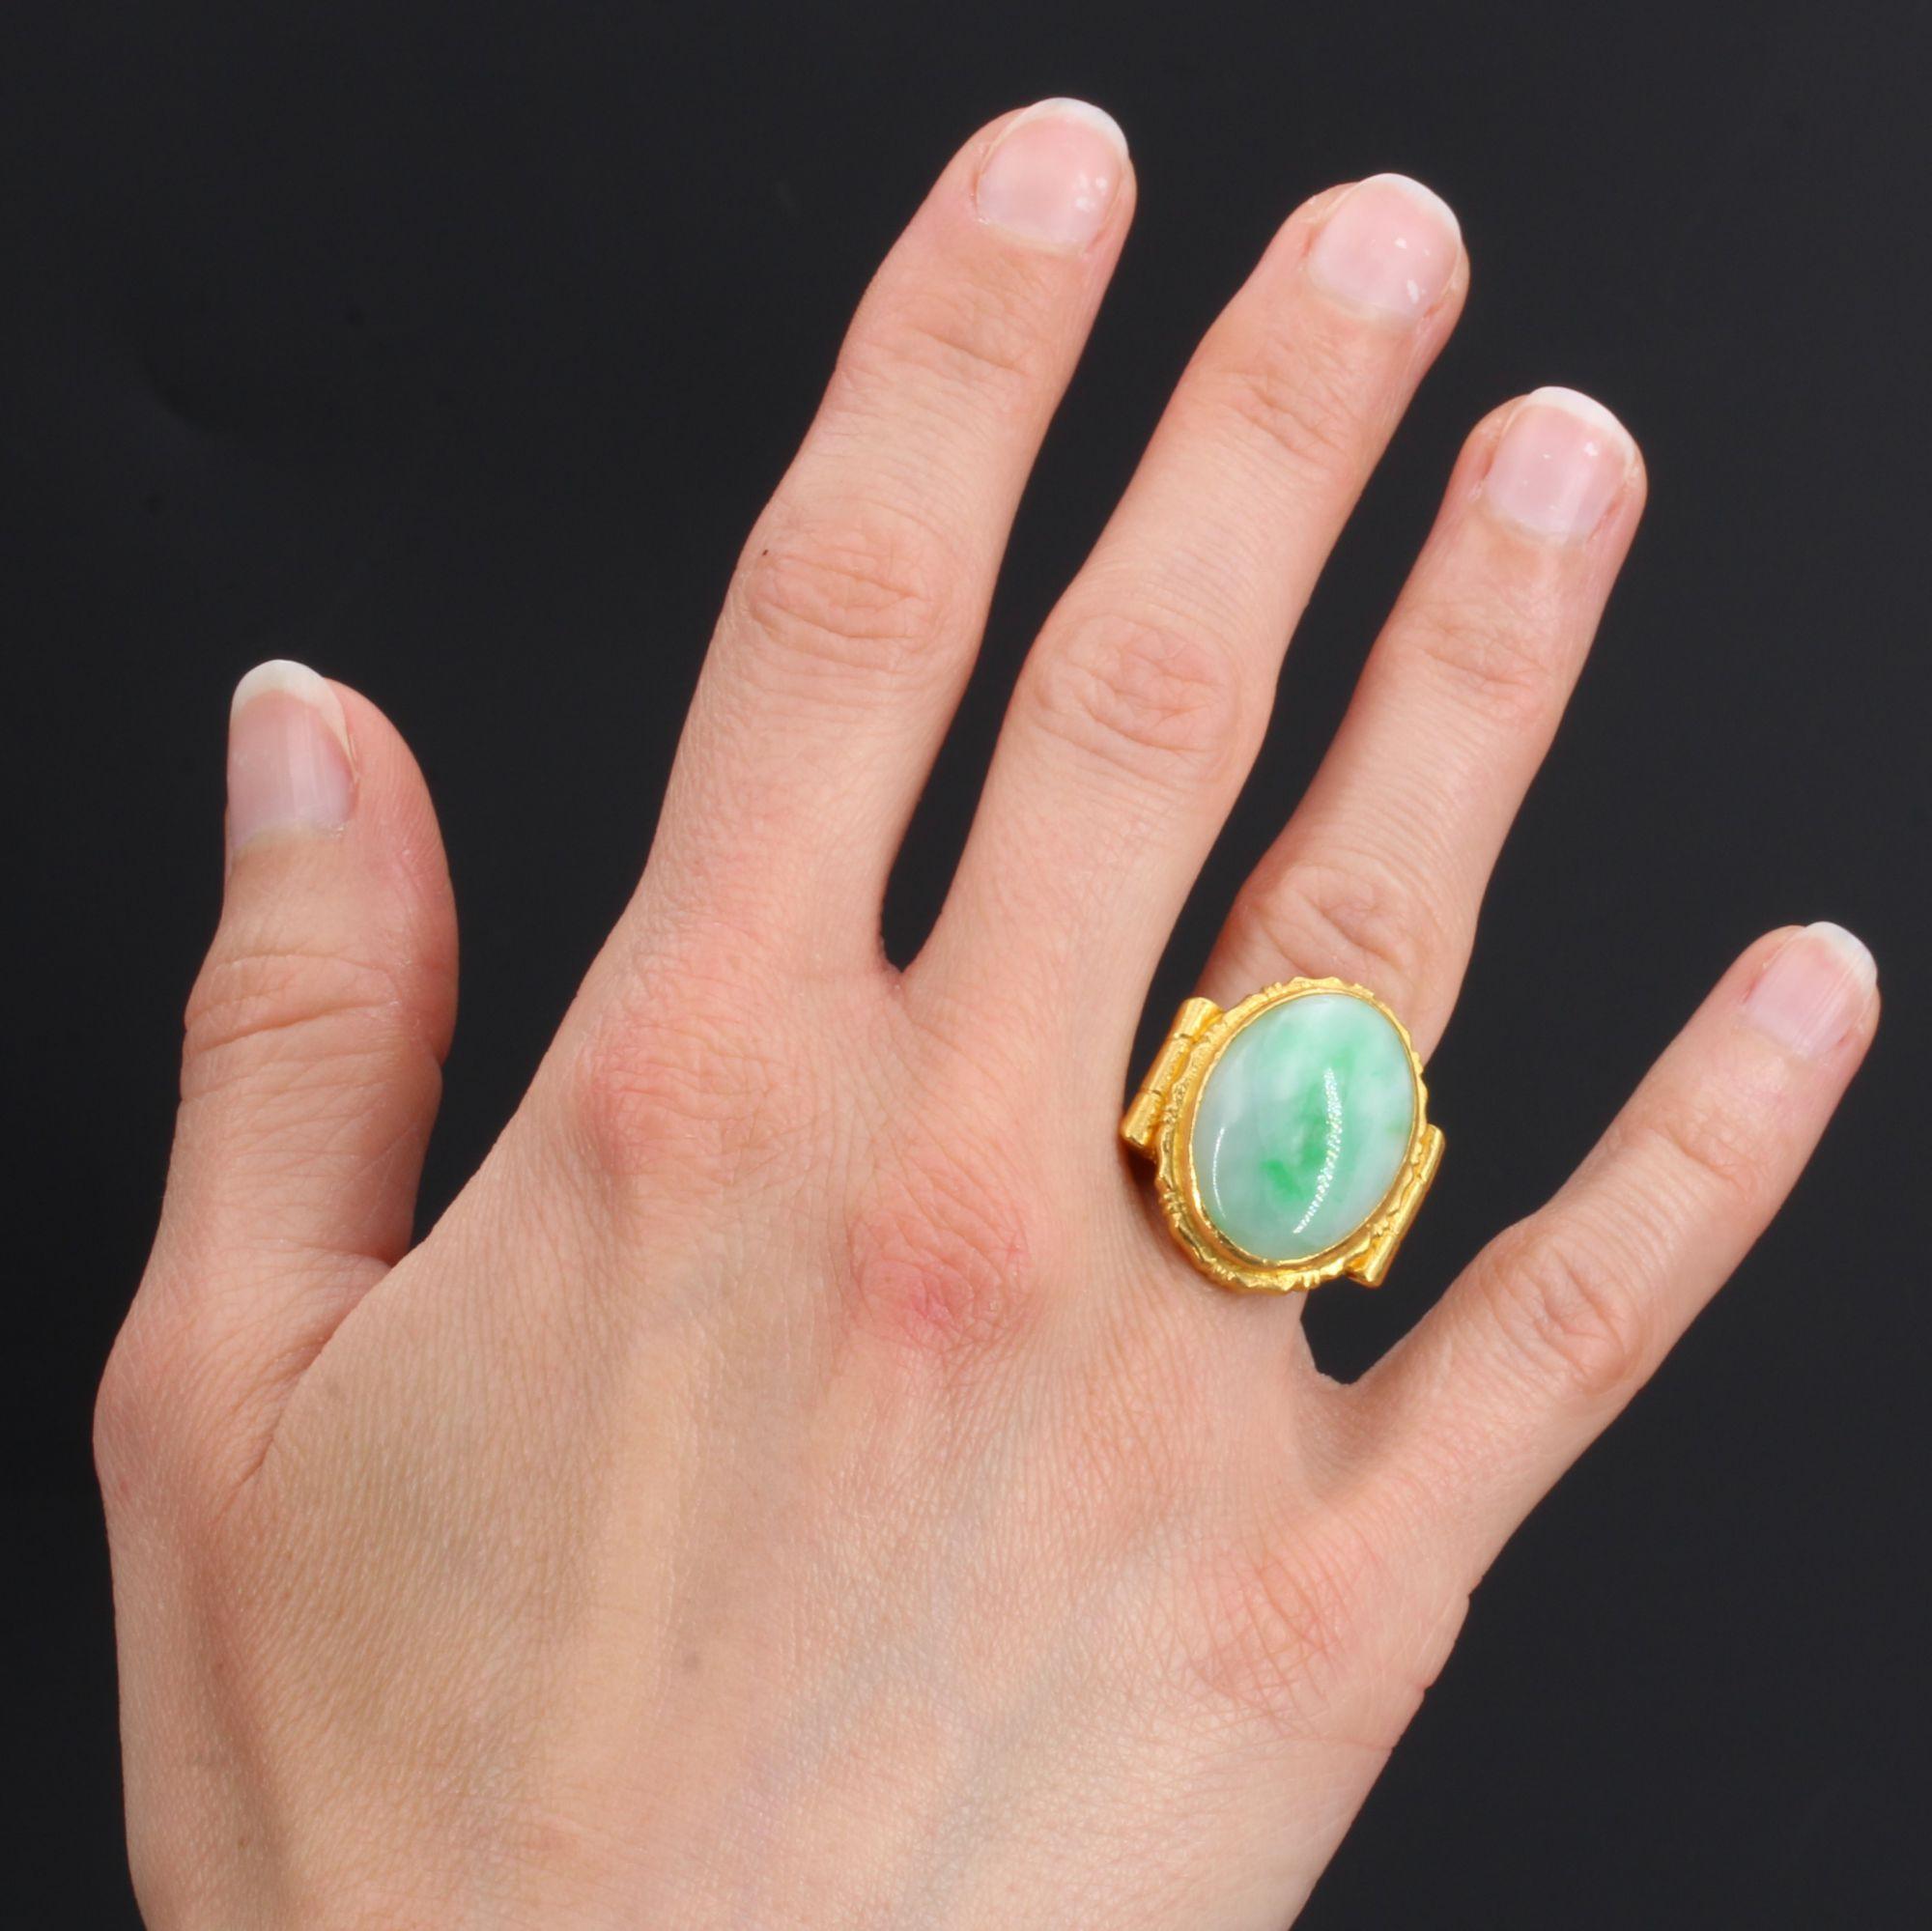 Ring in 18 karat yellow gold, owl hallmark.
Important antique ring, it is set with a cabochon of jade jadeite closed set, within a chased setting. On both sides of the head, the ring begins with an important chased gadroon which is then refined to